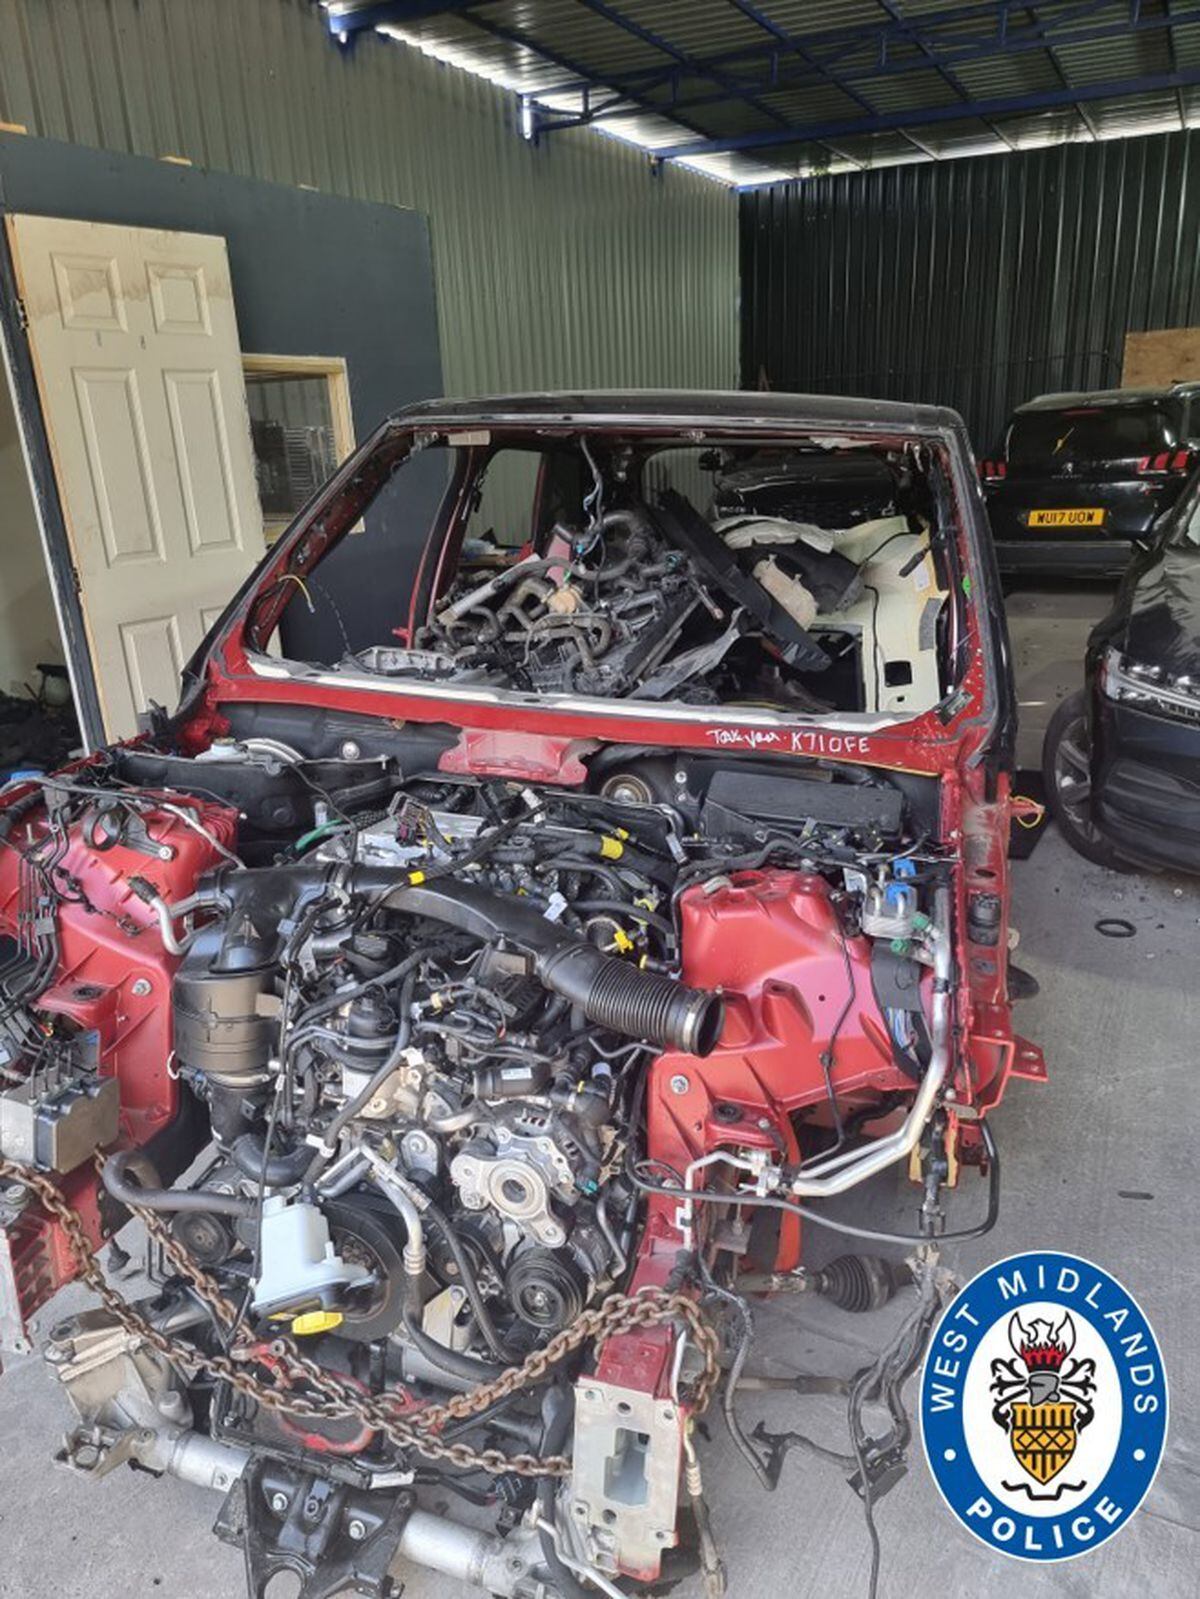 Some of the cars were found virtually disassembled at the site. Photo: West Midlands Police